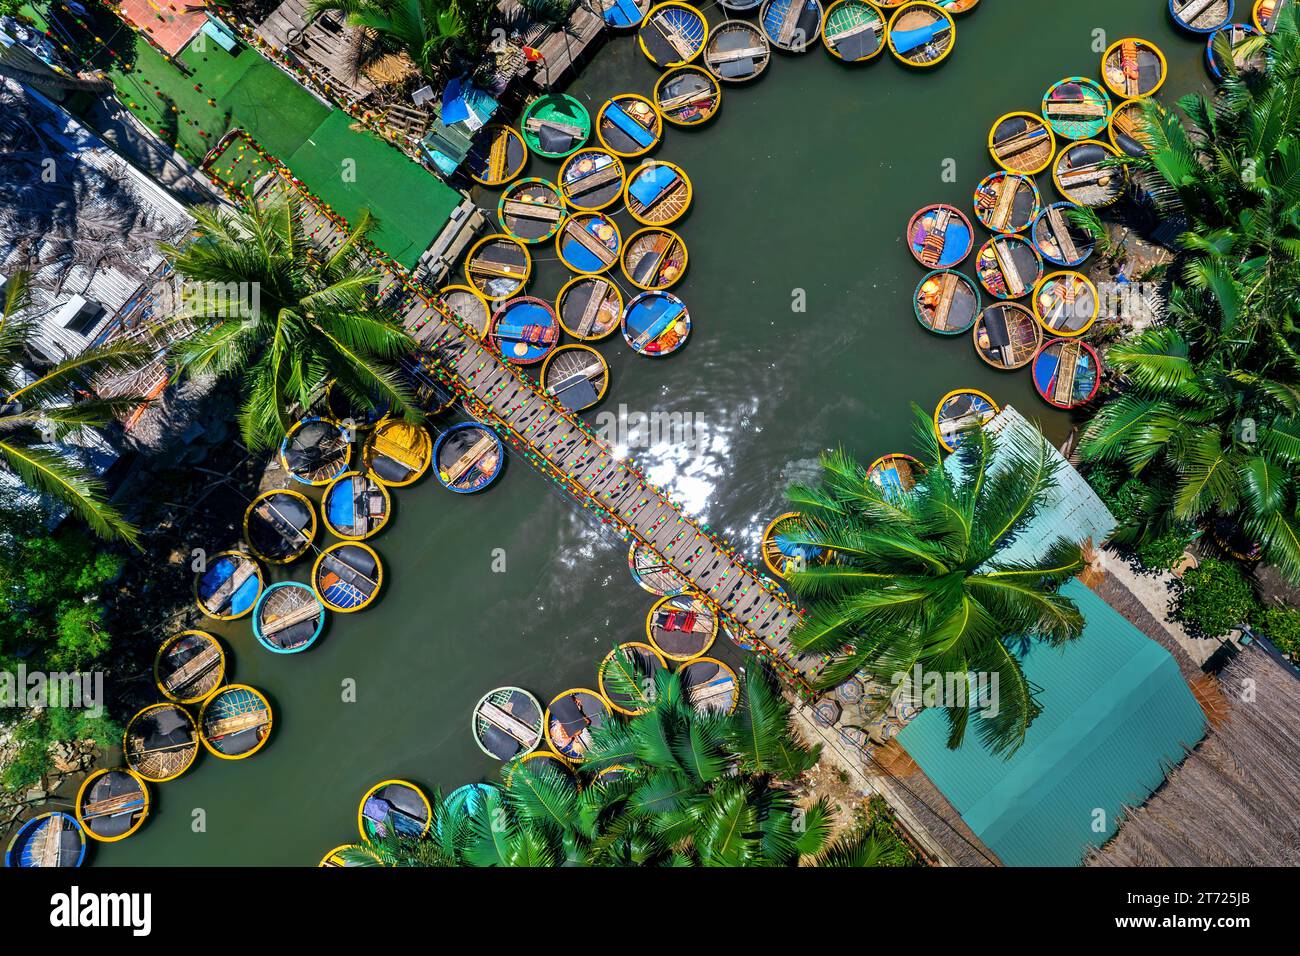 Bamboo basket boats on Thu Bon River, Coconut village eco tour in Hoi An, Vietnam. Stock Photo